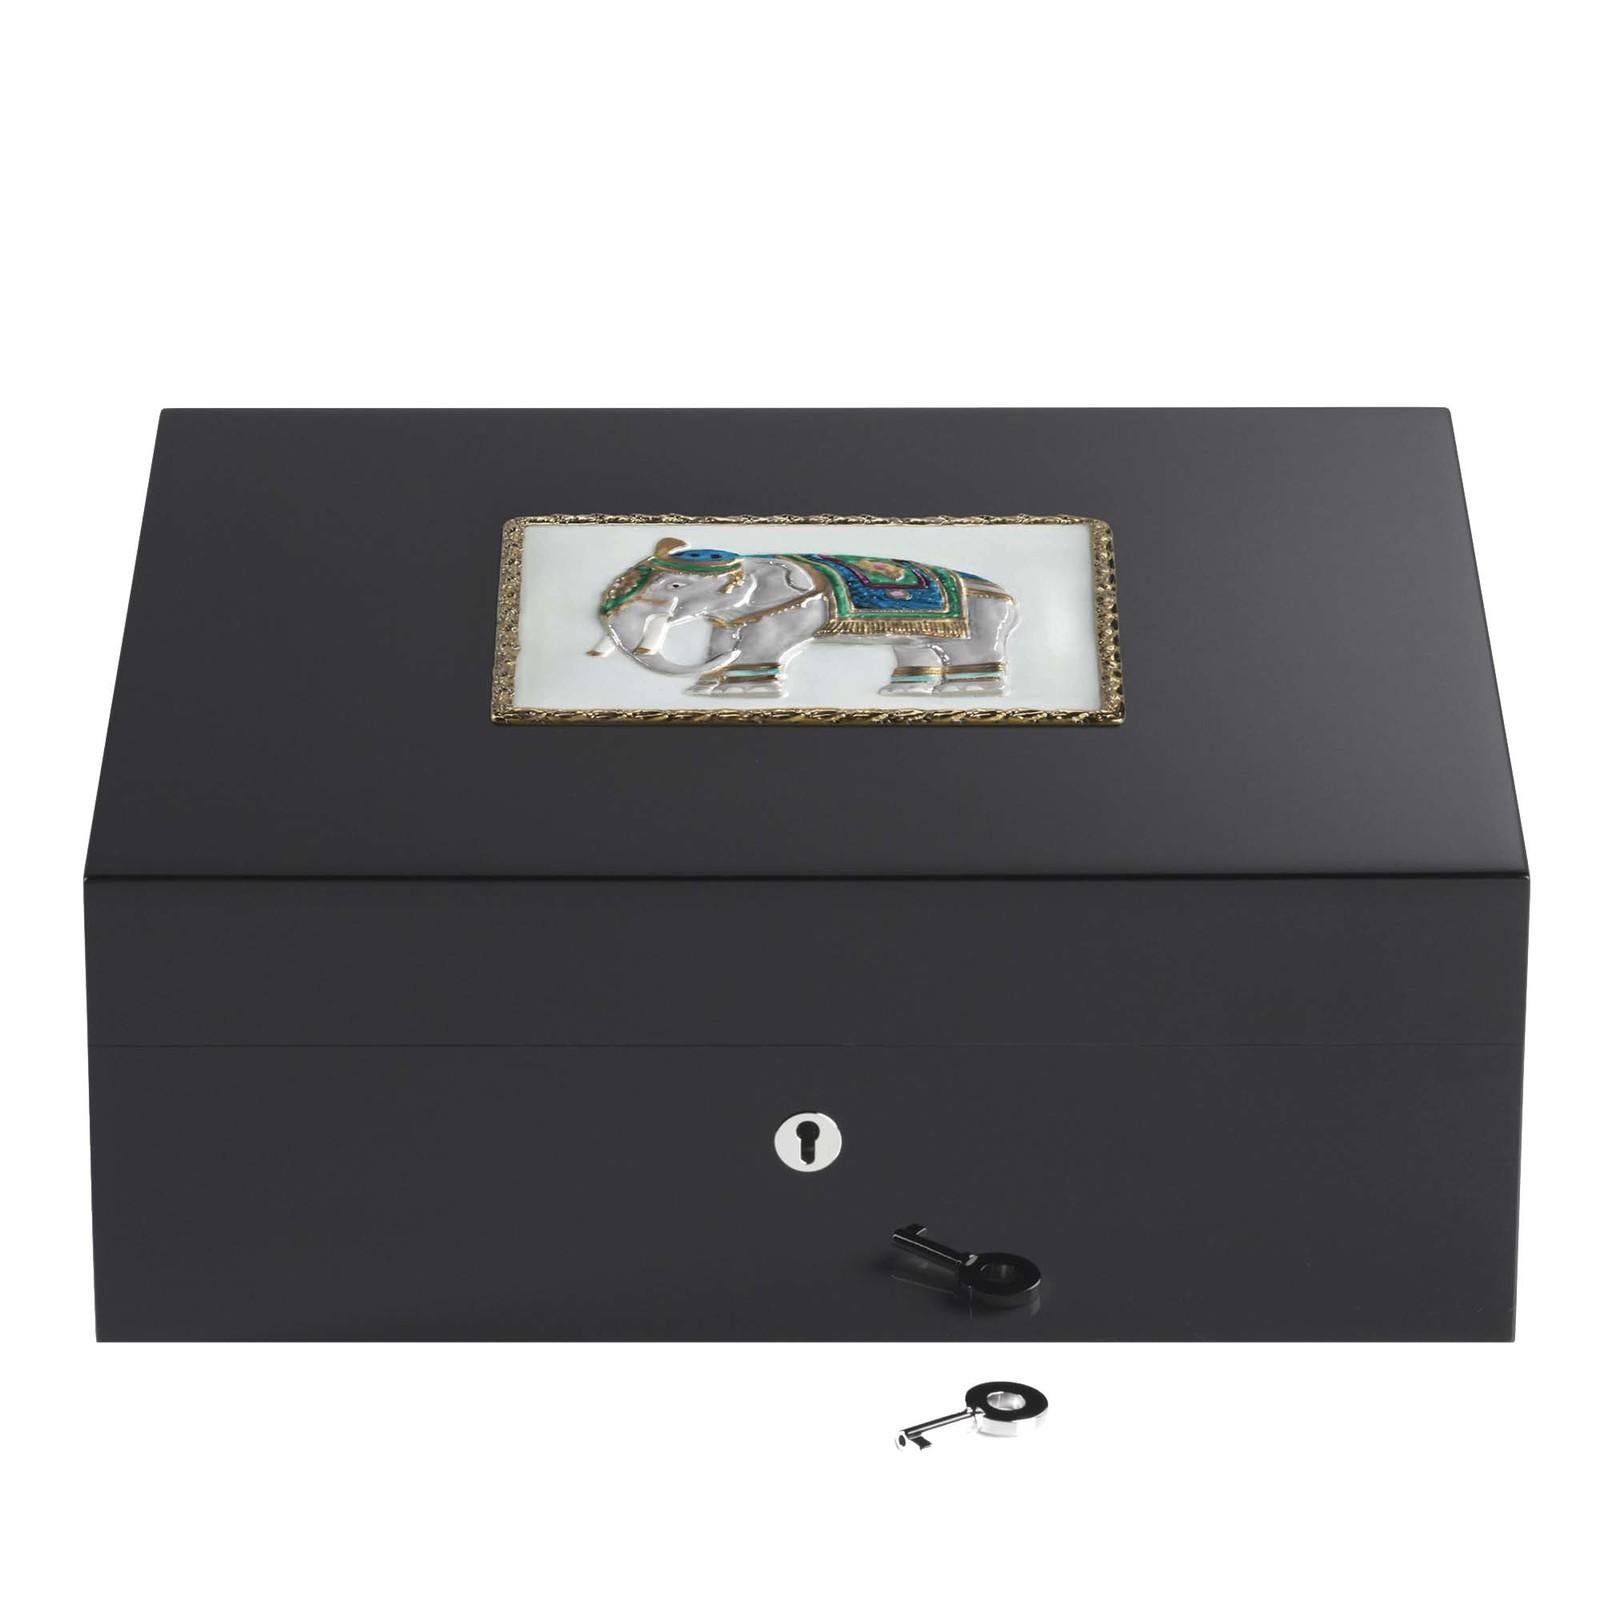 A majestic elephant rendered in fine details and vibrant colors graces the lid of this stunning humidor for 75 cigars. A superb object of functional decor, this piece can make a well-received gift. It is made of wood with a humidity-control system